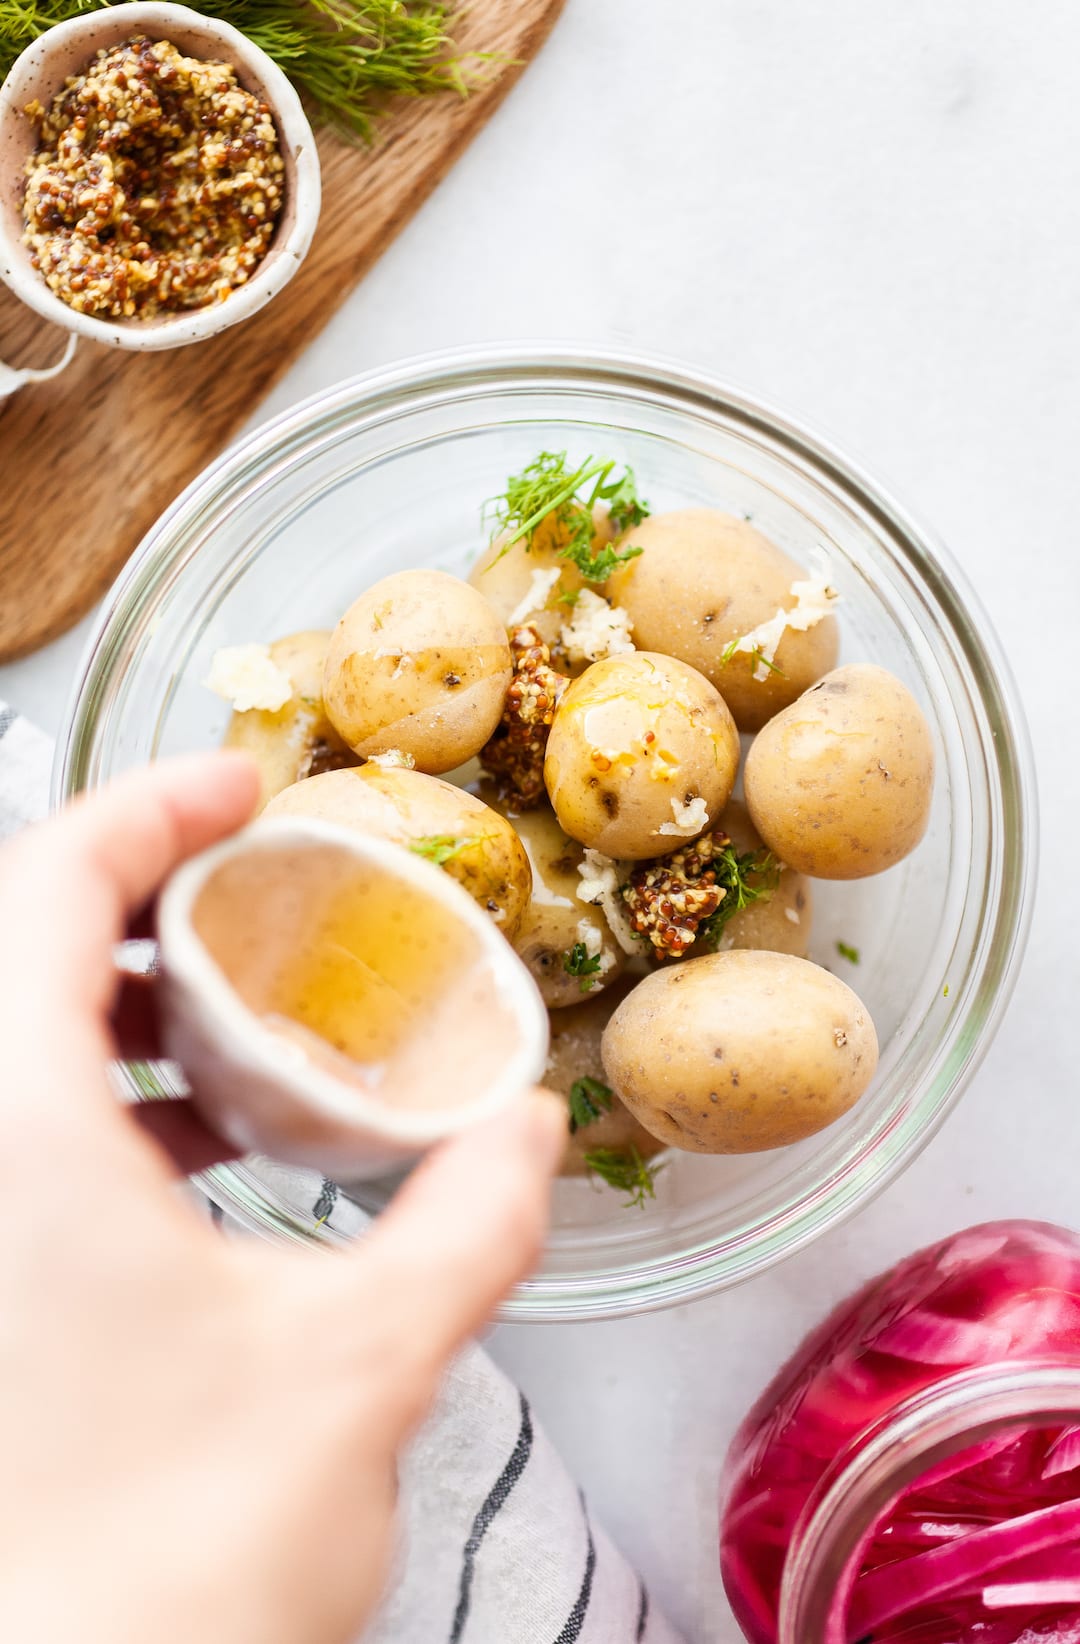 image of a bowl of boiled potatoes with herbs and dijon mustard and a hand pouring olive oil over the potatoes